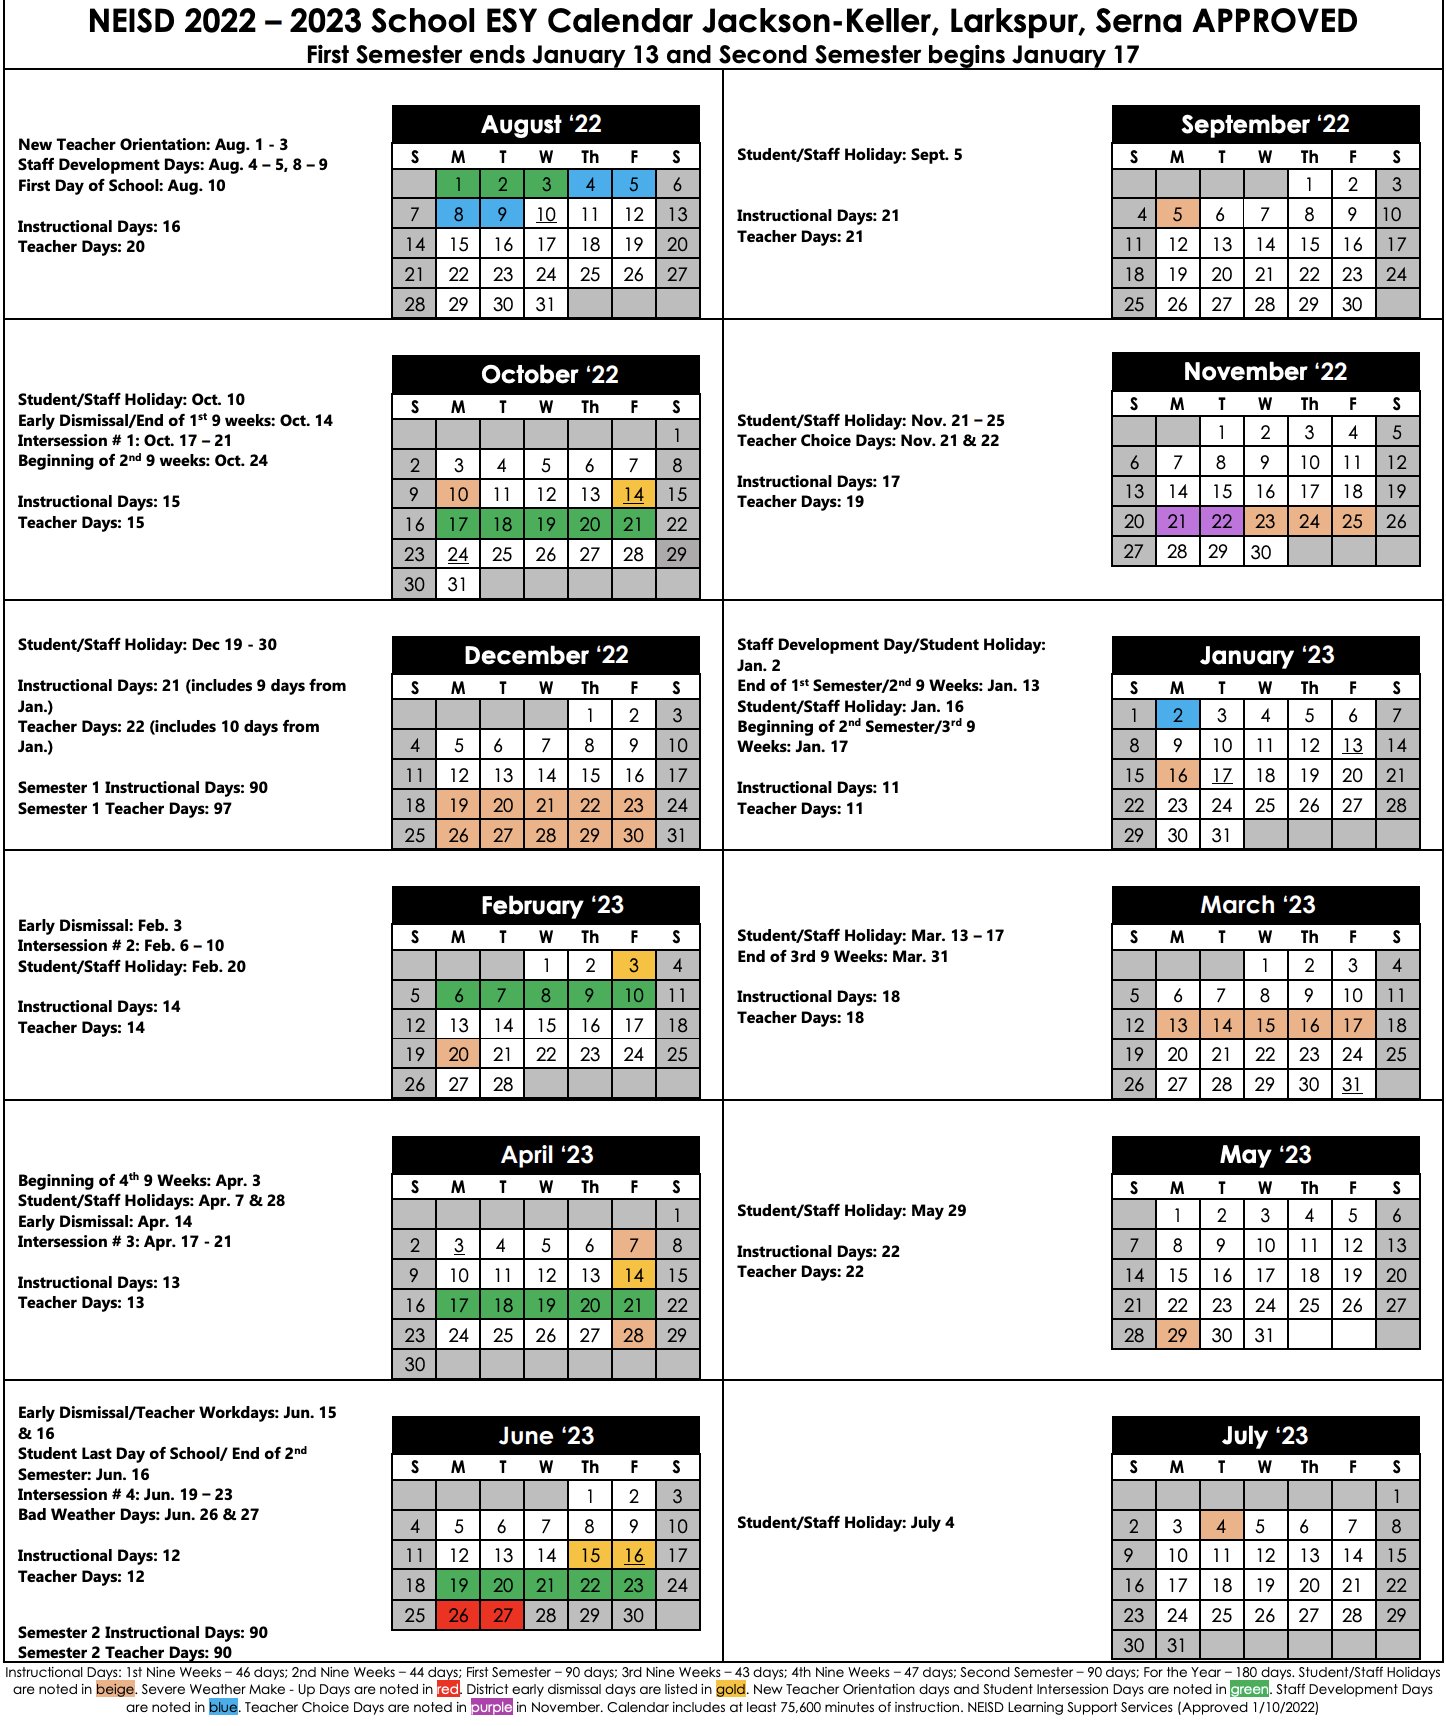 Neisd Calendar 2022 North East Isd On Twitter: "The Board Of Trustees Has Approved The 22-23  Traditional School Calendar, Year-Round School Calendar (Castle Hills Es),  And Extended-Year School Calendar (Jackson-Keller, Larkspur And Serna  Elementary Schools).